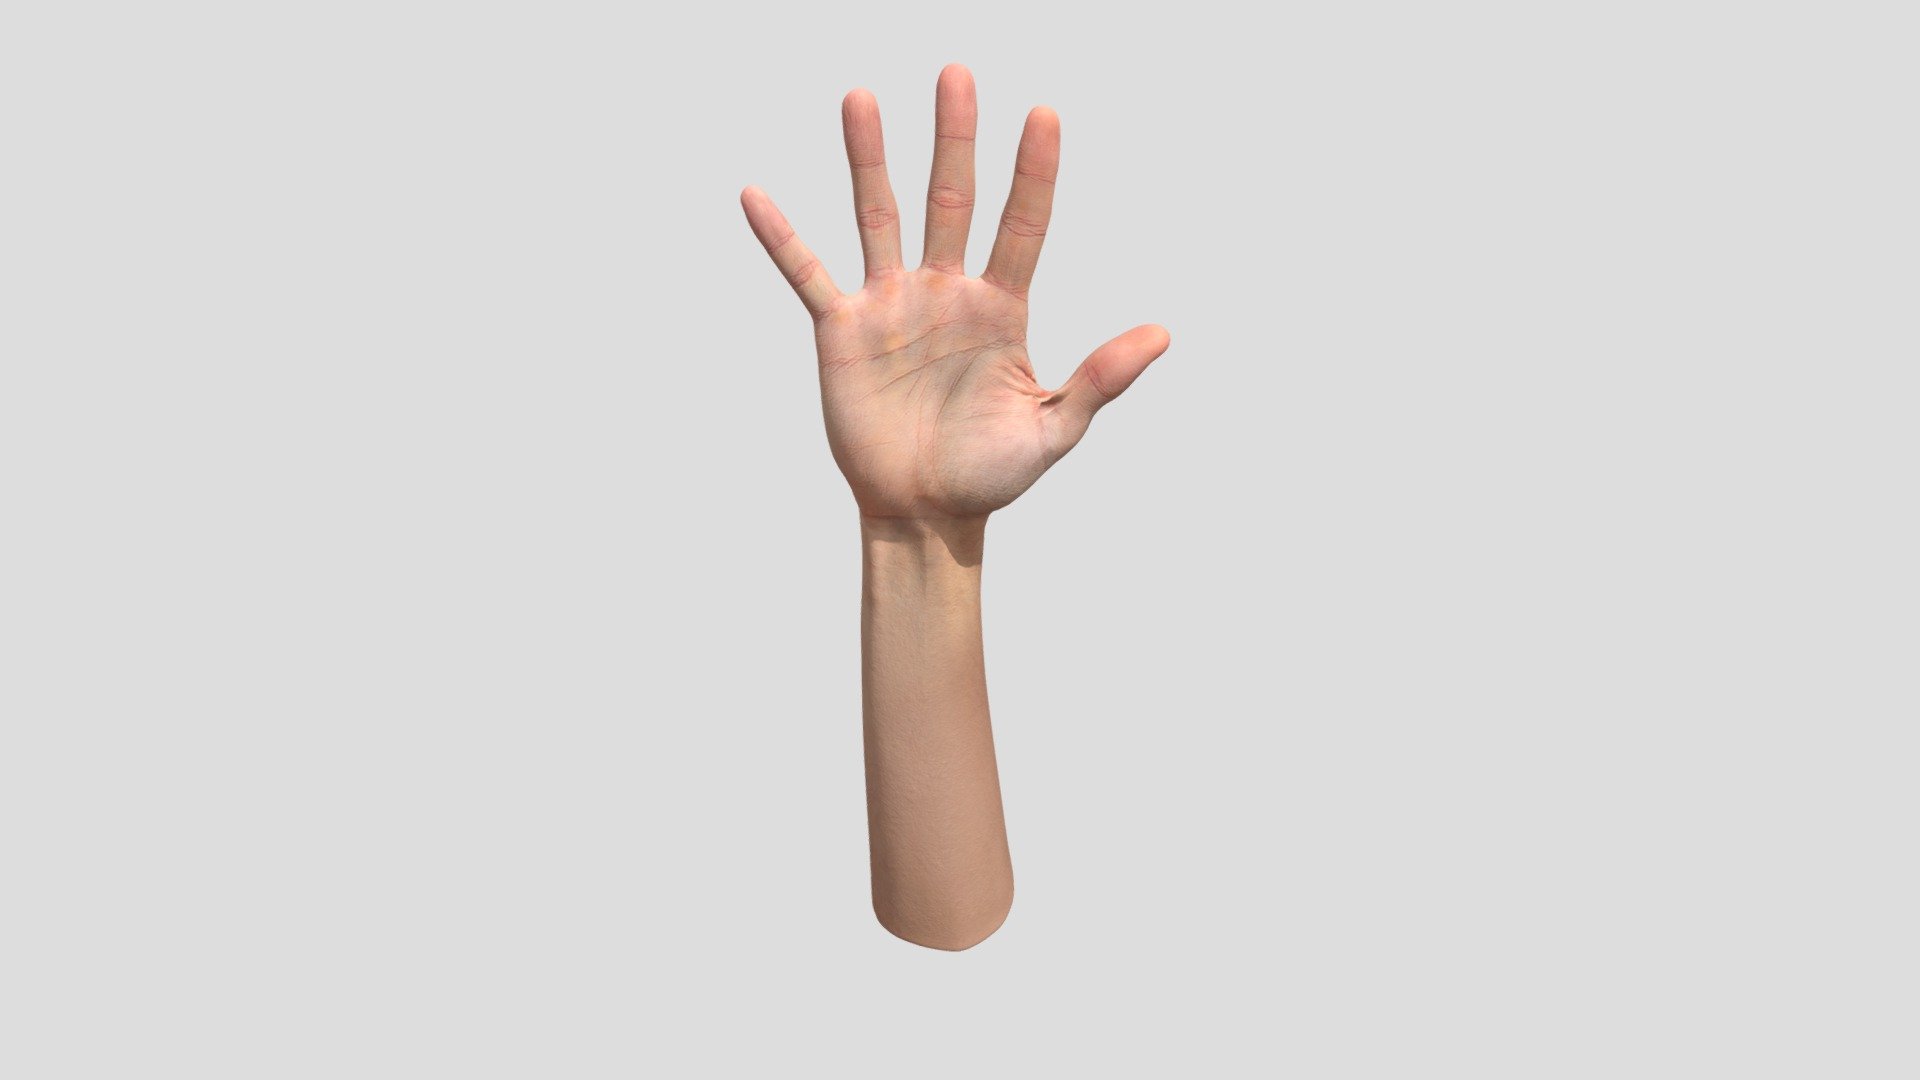 We would like to introduce you to one of the many retopologized hands that offers precise retopology.This hand is perfect for anyone looking for a realistic and aesthetically crafted model for their projects. Find out how this collection can enrich your creative work and give it the visual punch it needs!

Ethnicity: White
Gender: Male
Age: 41
Height: 186 cm
Weight: 62 kg

NOTE: Retopologized scan with postproduction.

Technical Specifications:

1 x OBJ. File / 19 600 polys
2 x 8K PNG Texture - Diffuse, Normal

3Dsk provides all you need from virtual casting studio. Model casting, neutral &amp; morph expression scans, full body scans, accessories and cloth scans, 3D postproduction, photoshooting of full body, portrait, hair, eyes and skin &amp; other on demand services 3d model